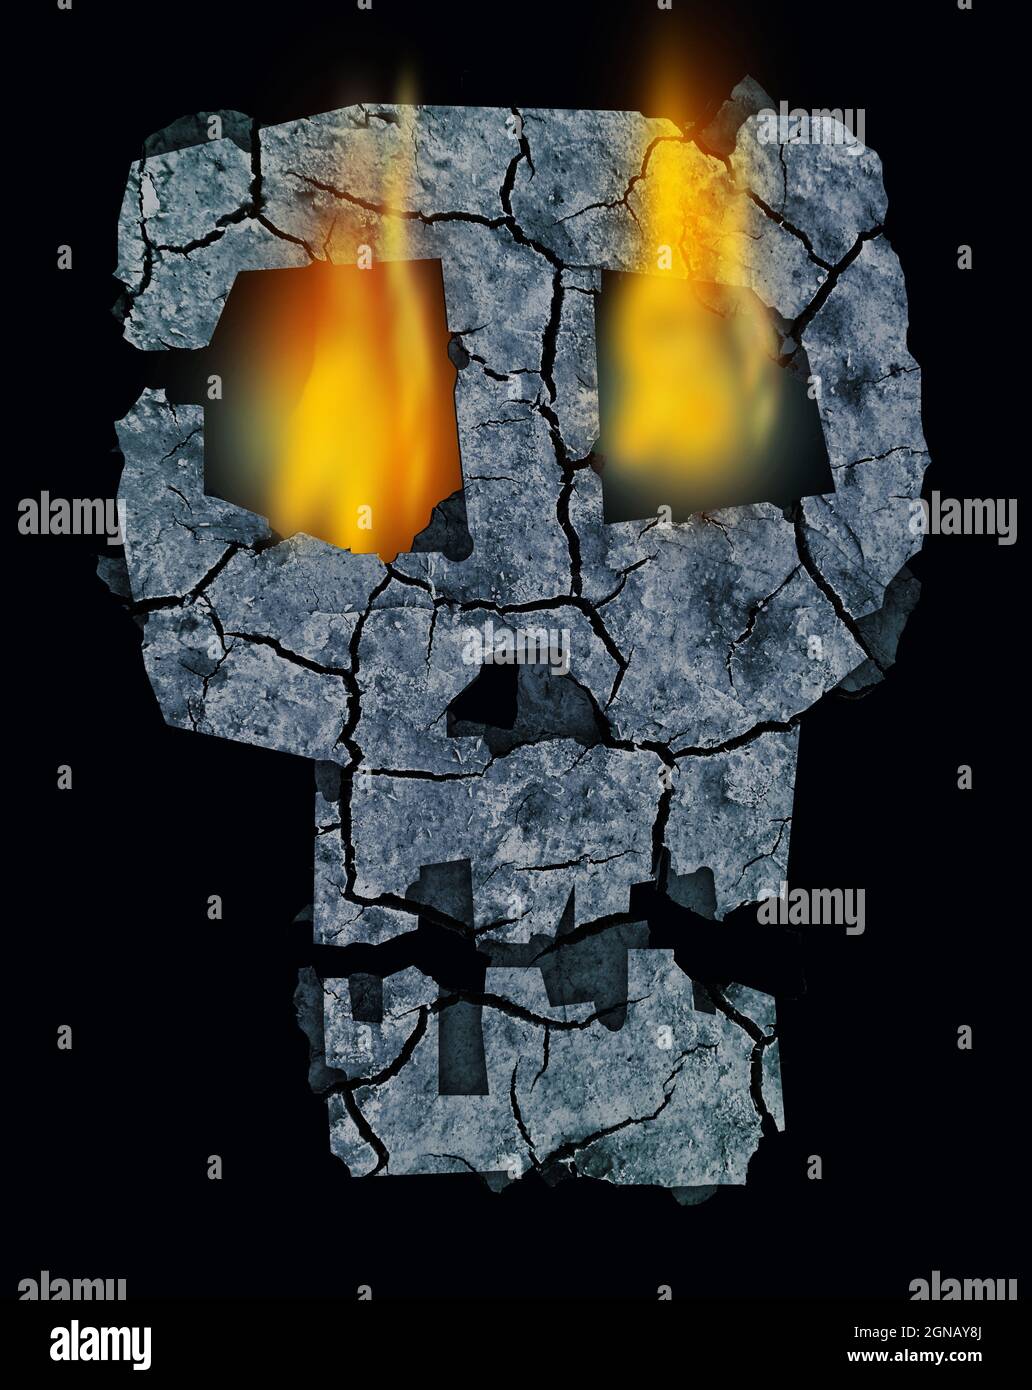 Skull with glowing fiery eyes, Halloween motive. Photo-montage with Dry cracked earth and stylized human skull. Stock Photo